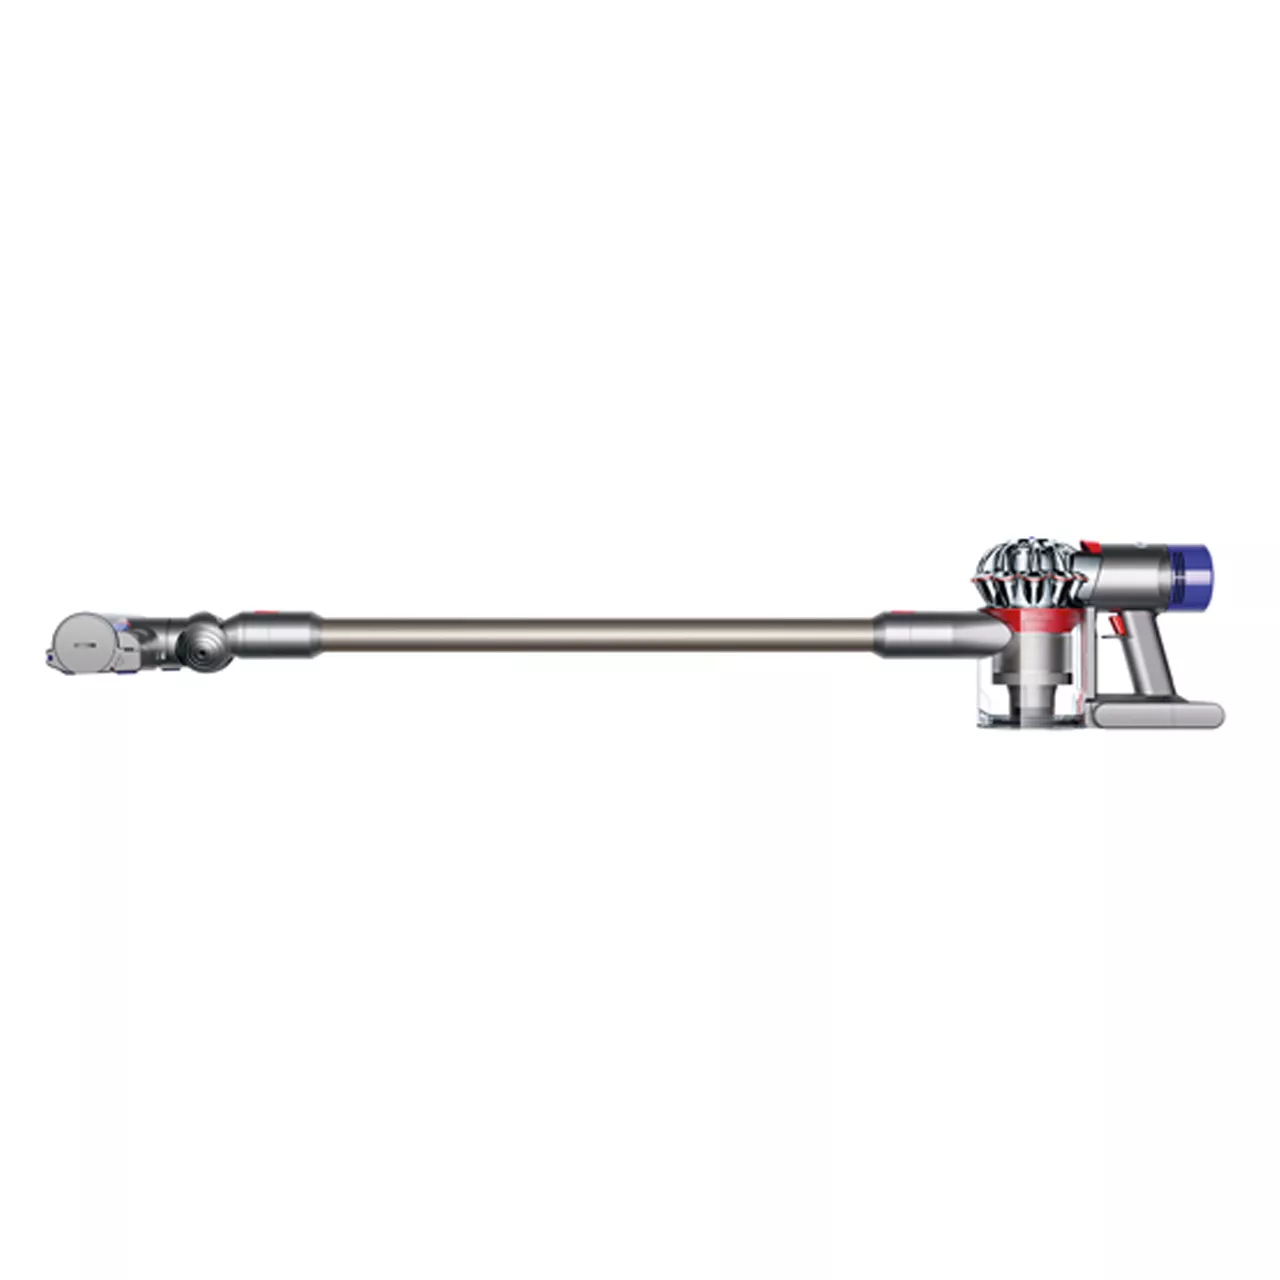 Dyson Animal UK in Stockport | Enquire Today | Village Domestics Supplies